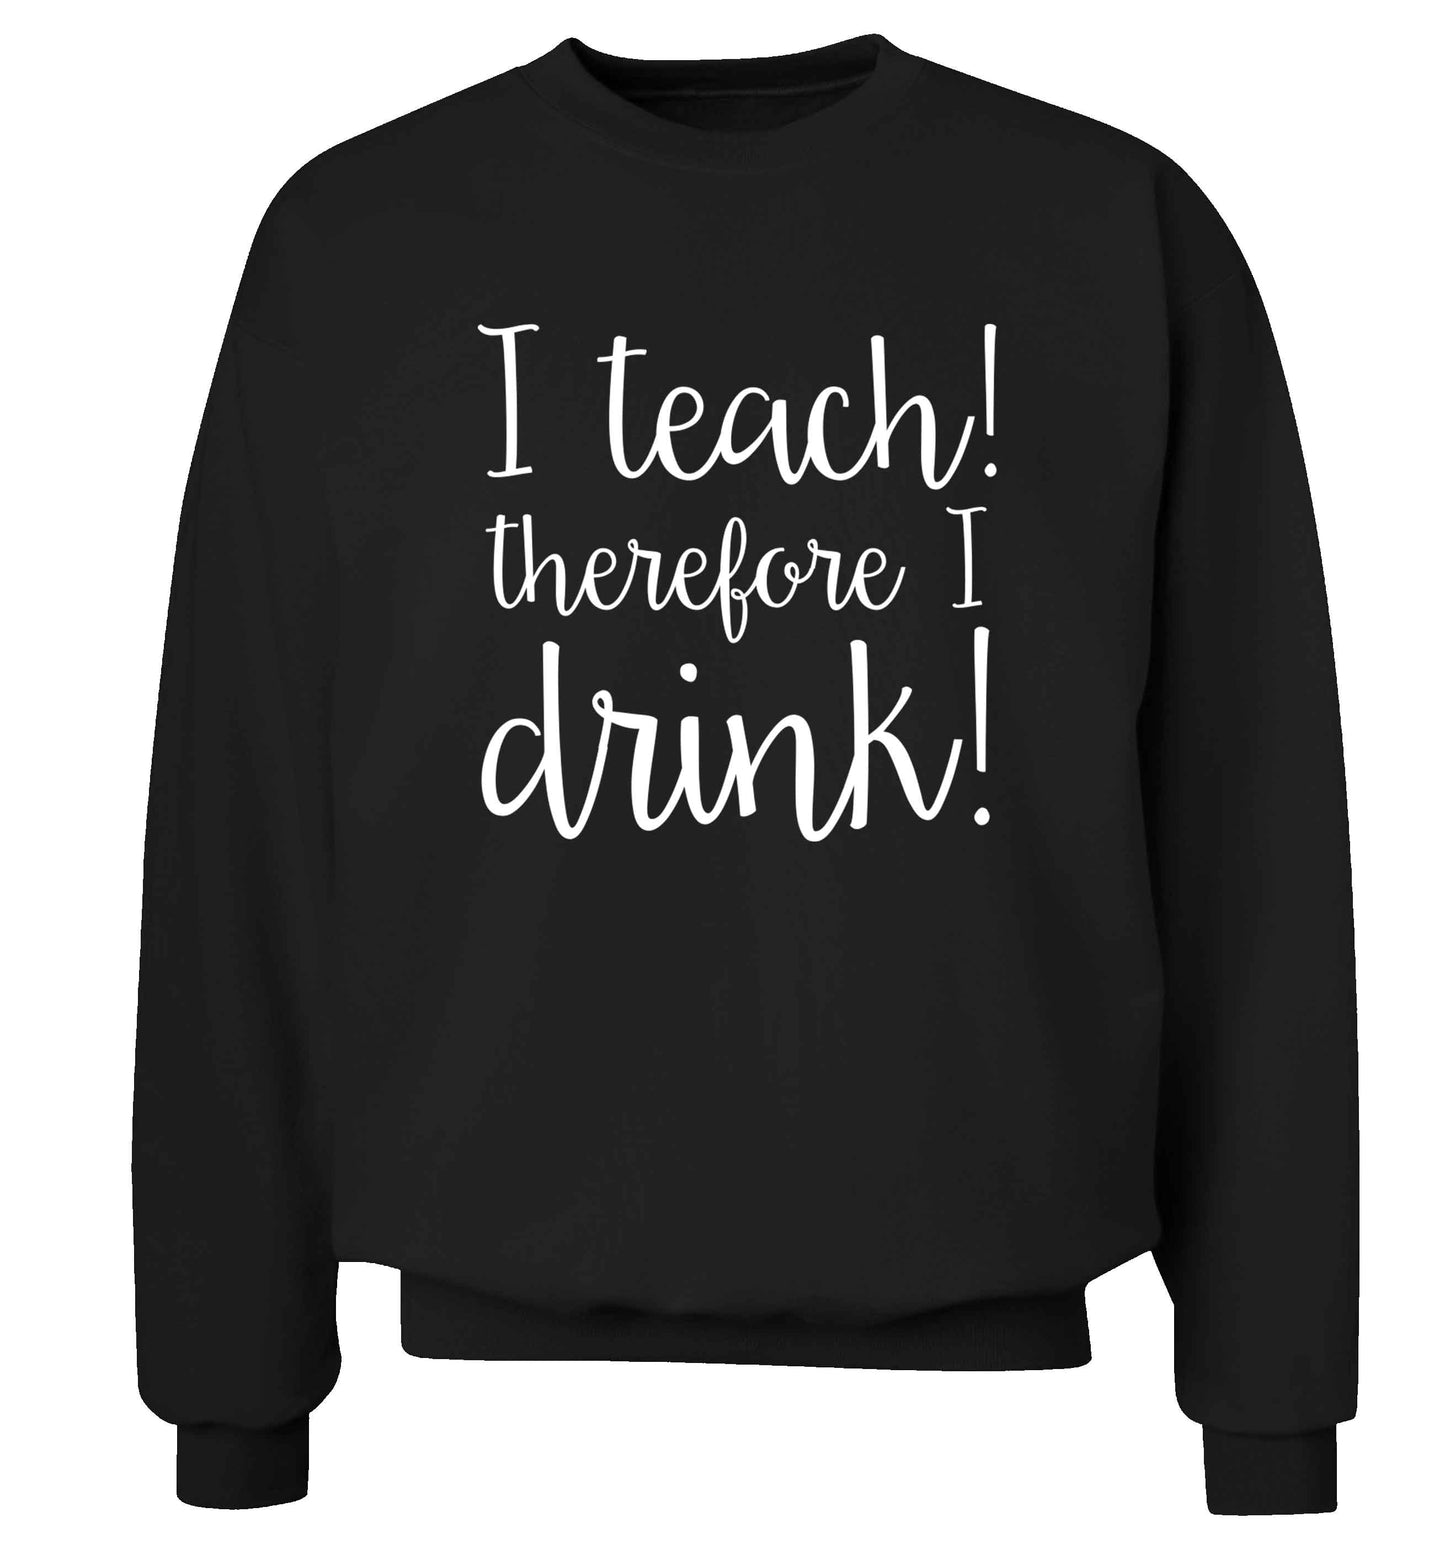 I teach therefore I drink adult's unisex black sweater 2XL